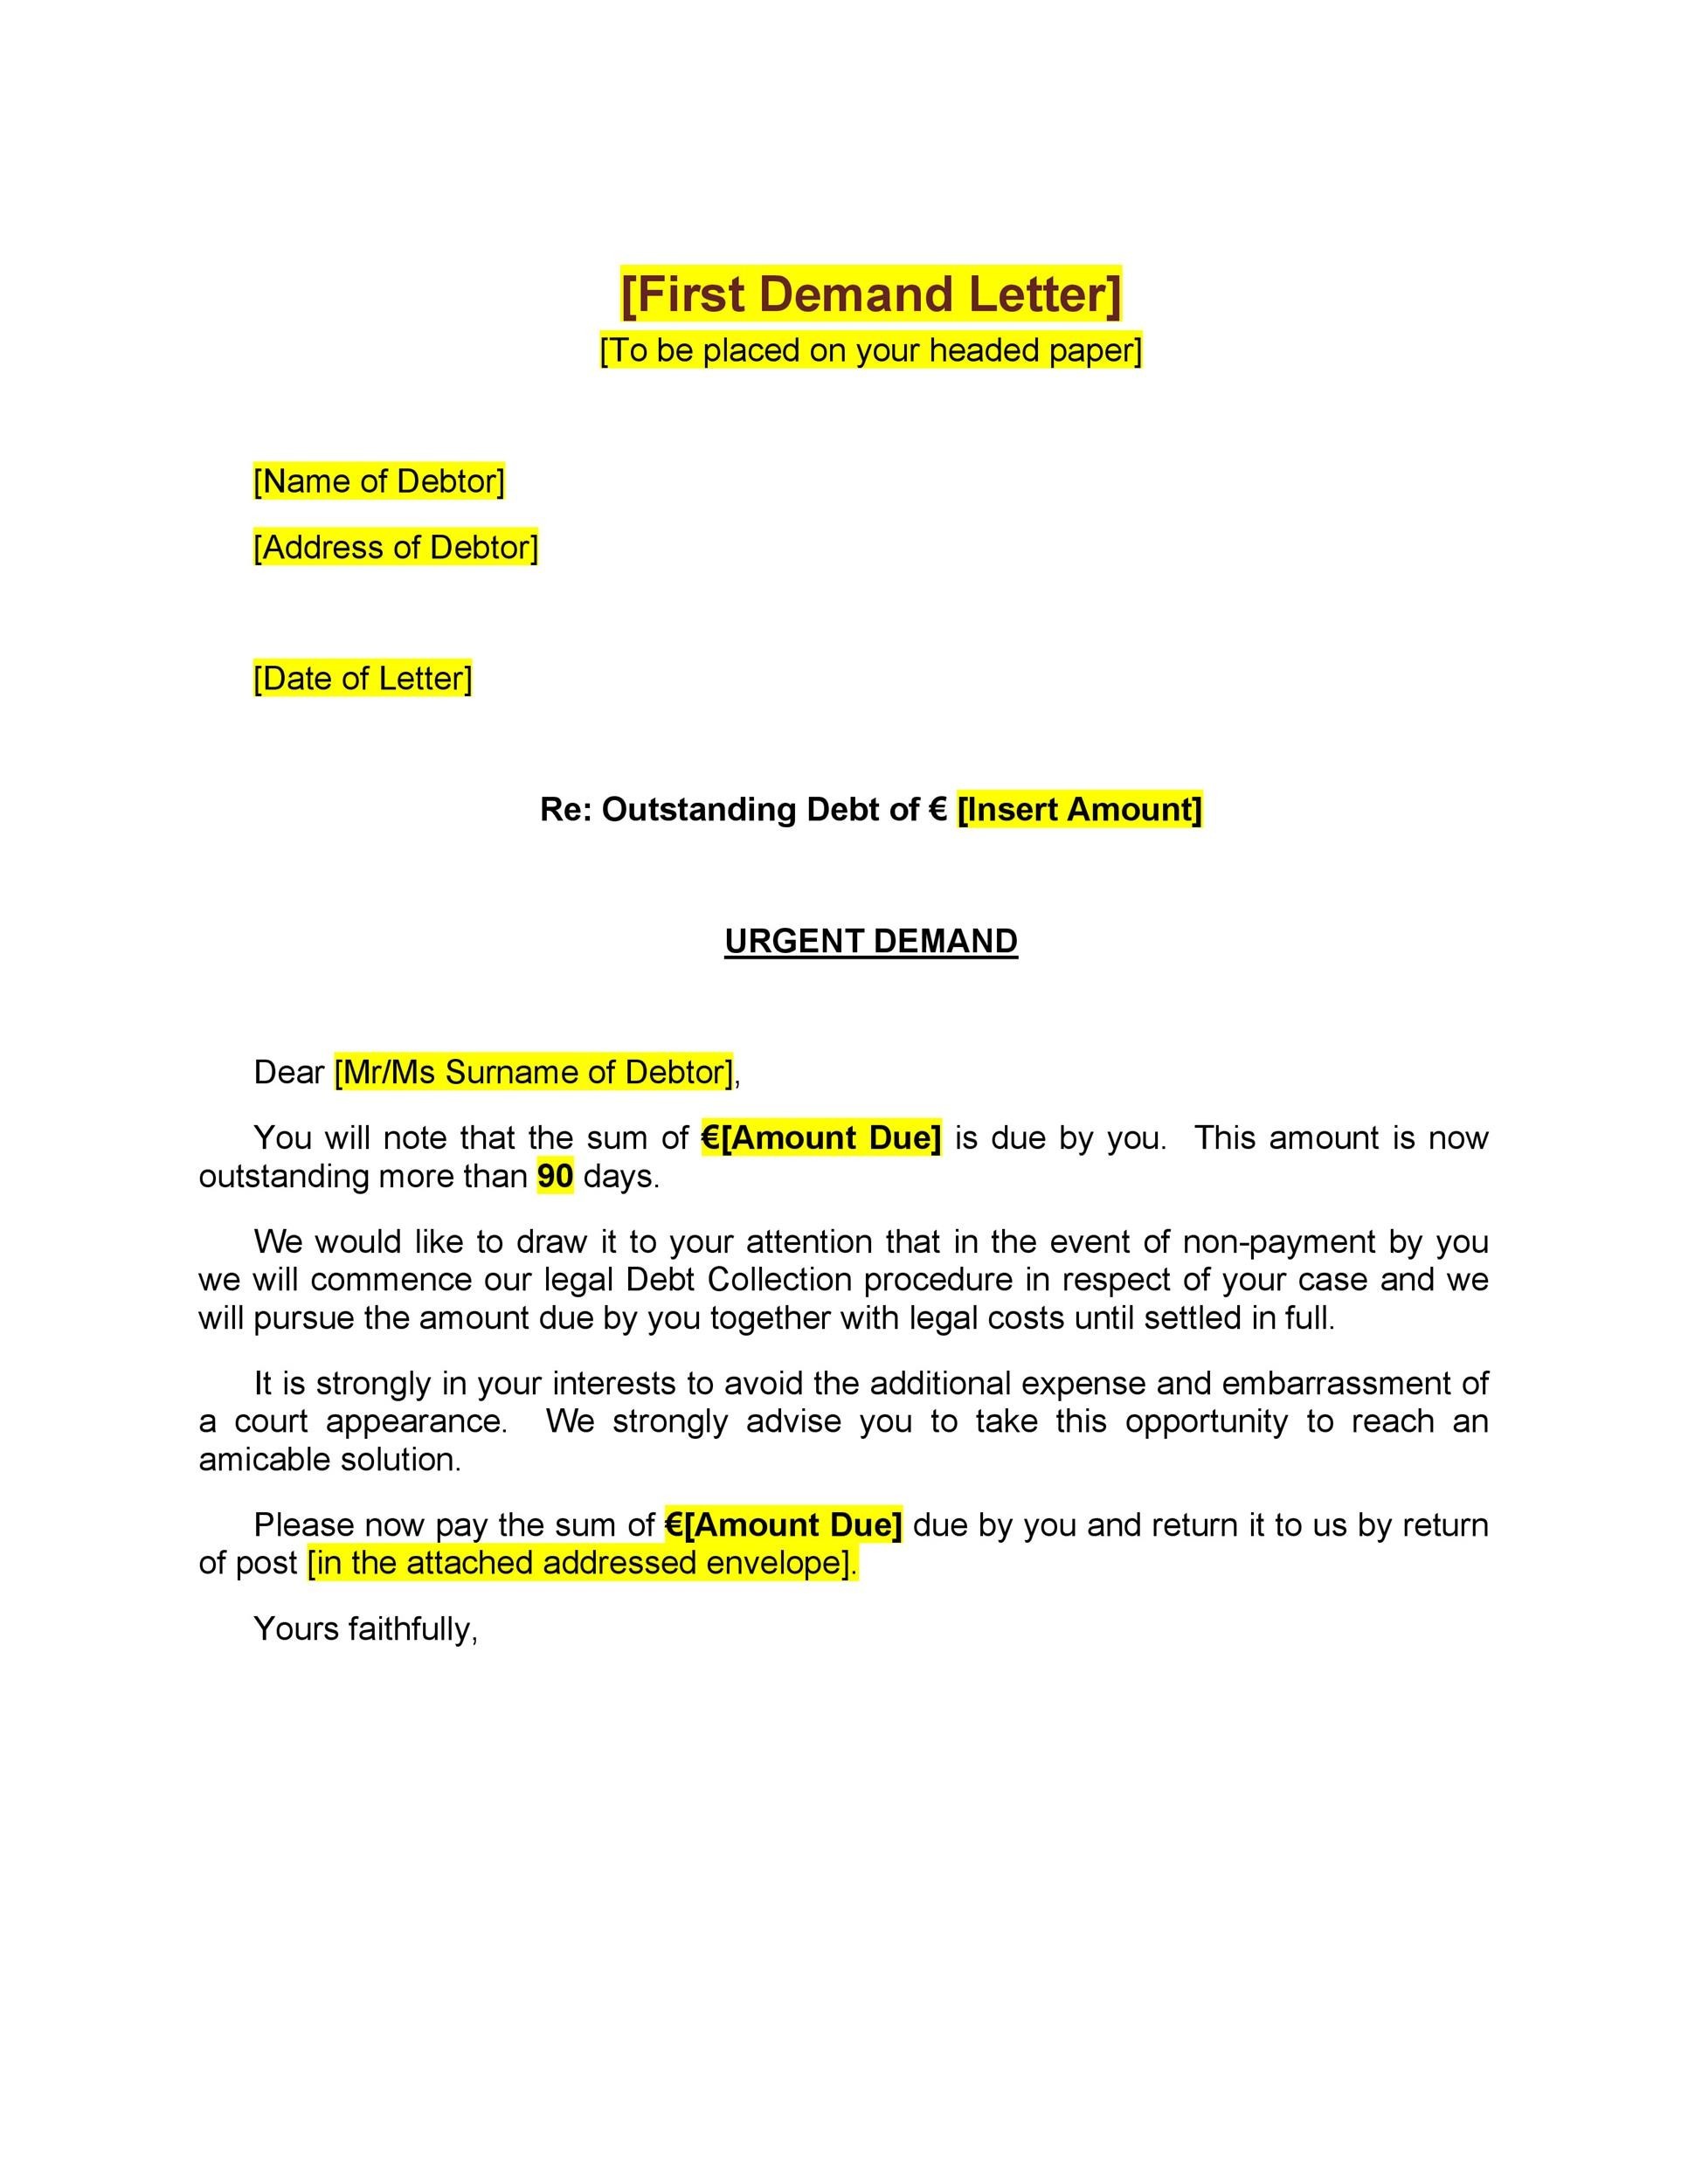 40 Strong Demand Letter Templates (Free Samples) ᐅ TemplateLab